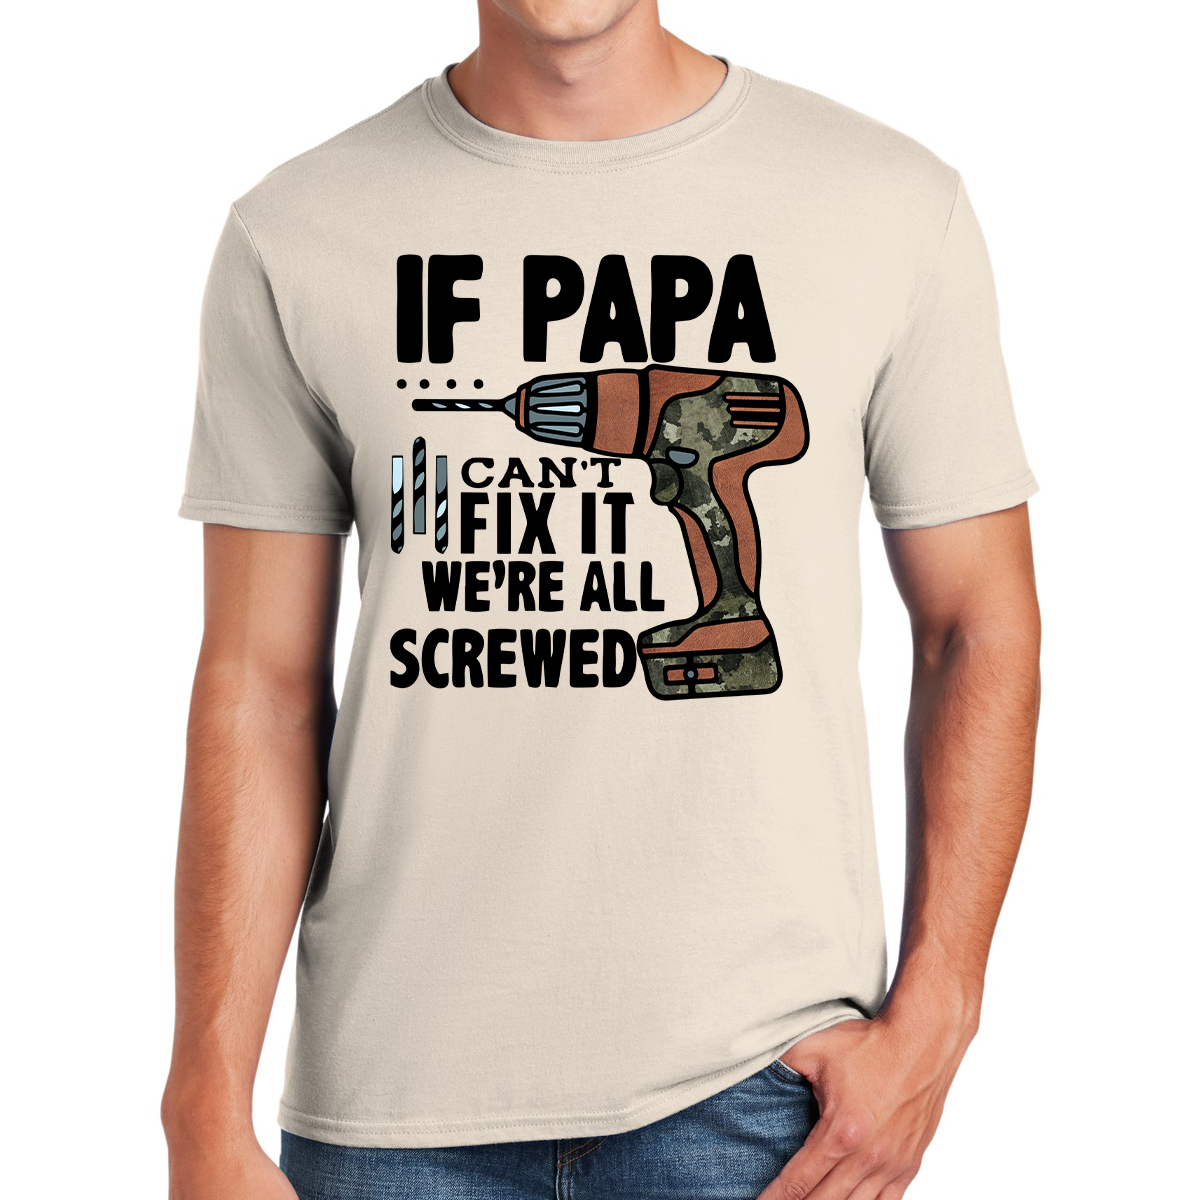 If Papa Can't Fix It We're All Screwed Master Of Repairs Gift For Dads T-shirt